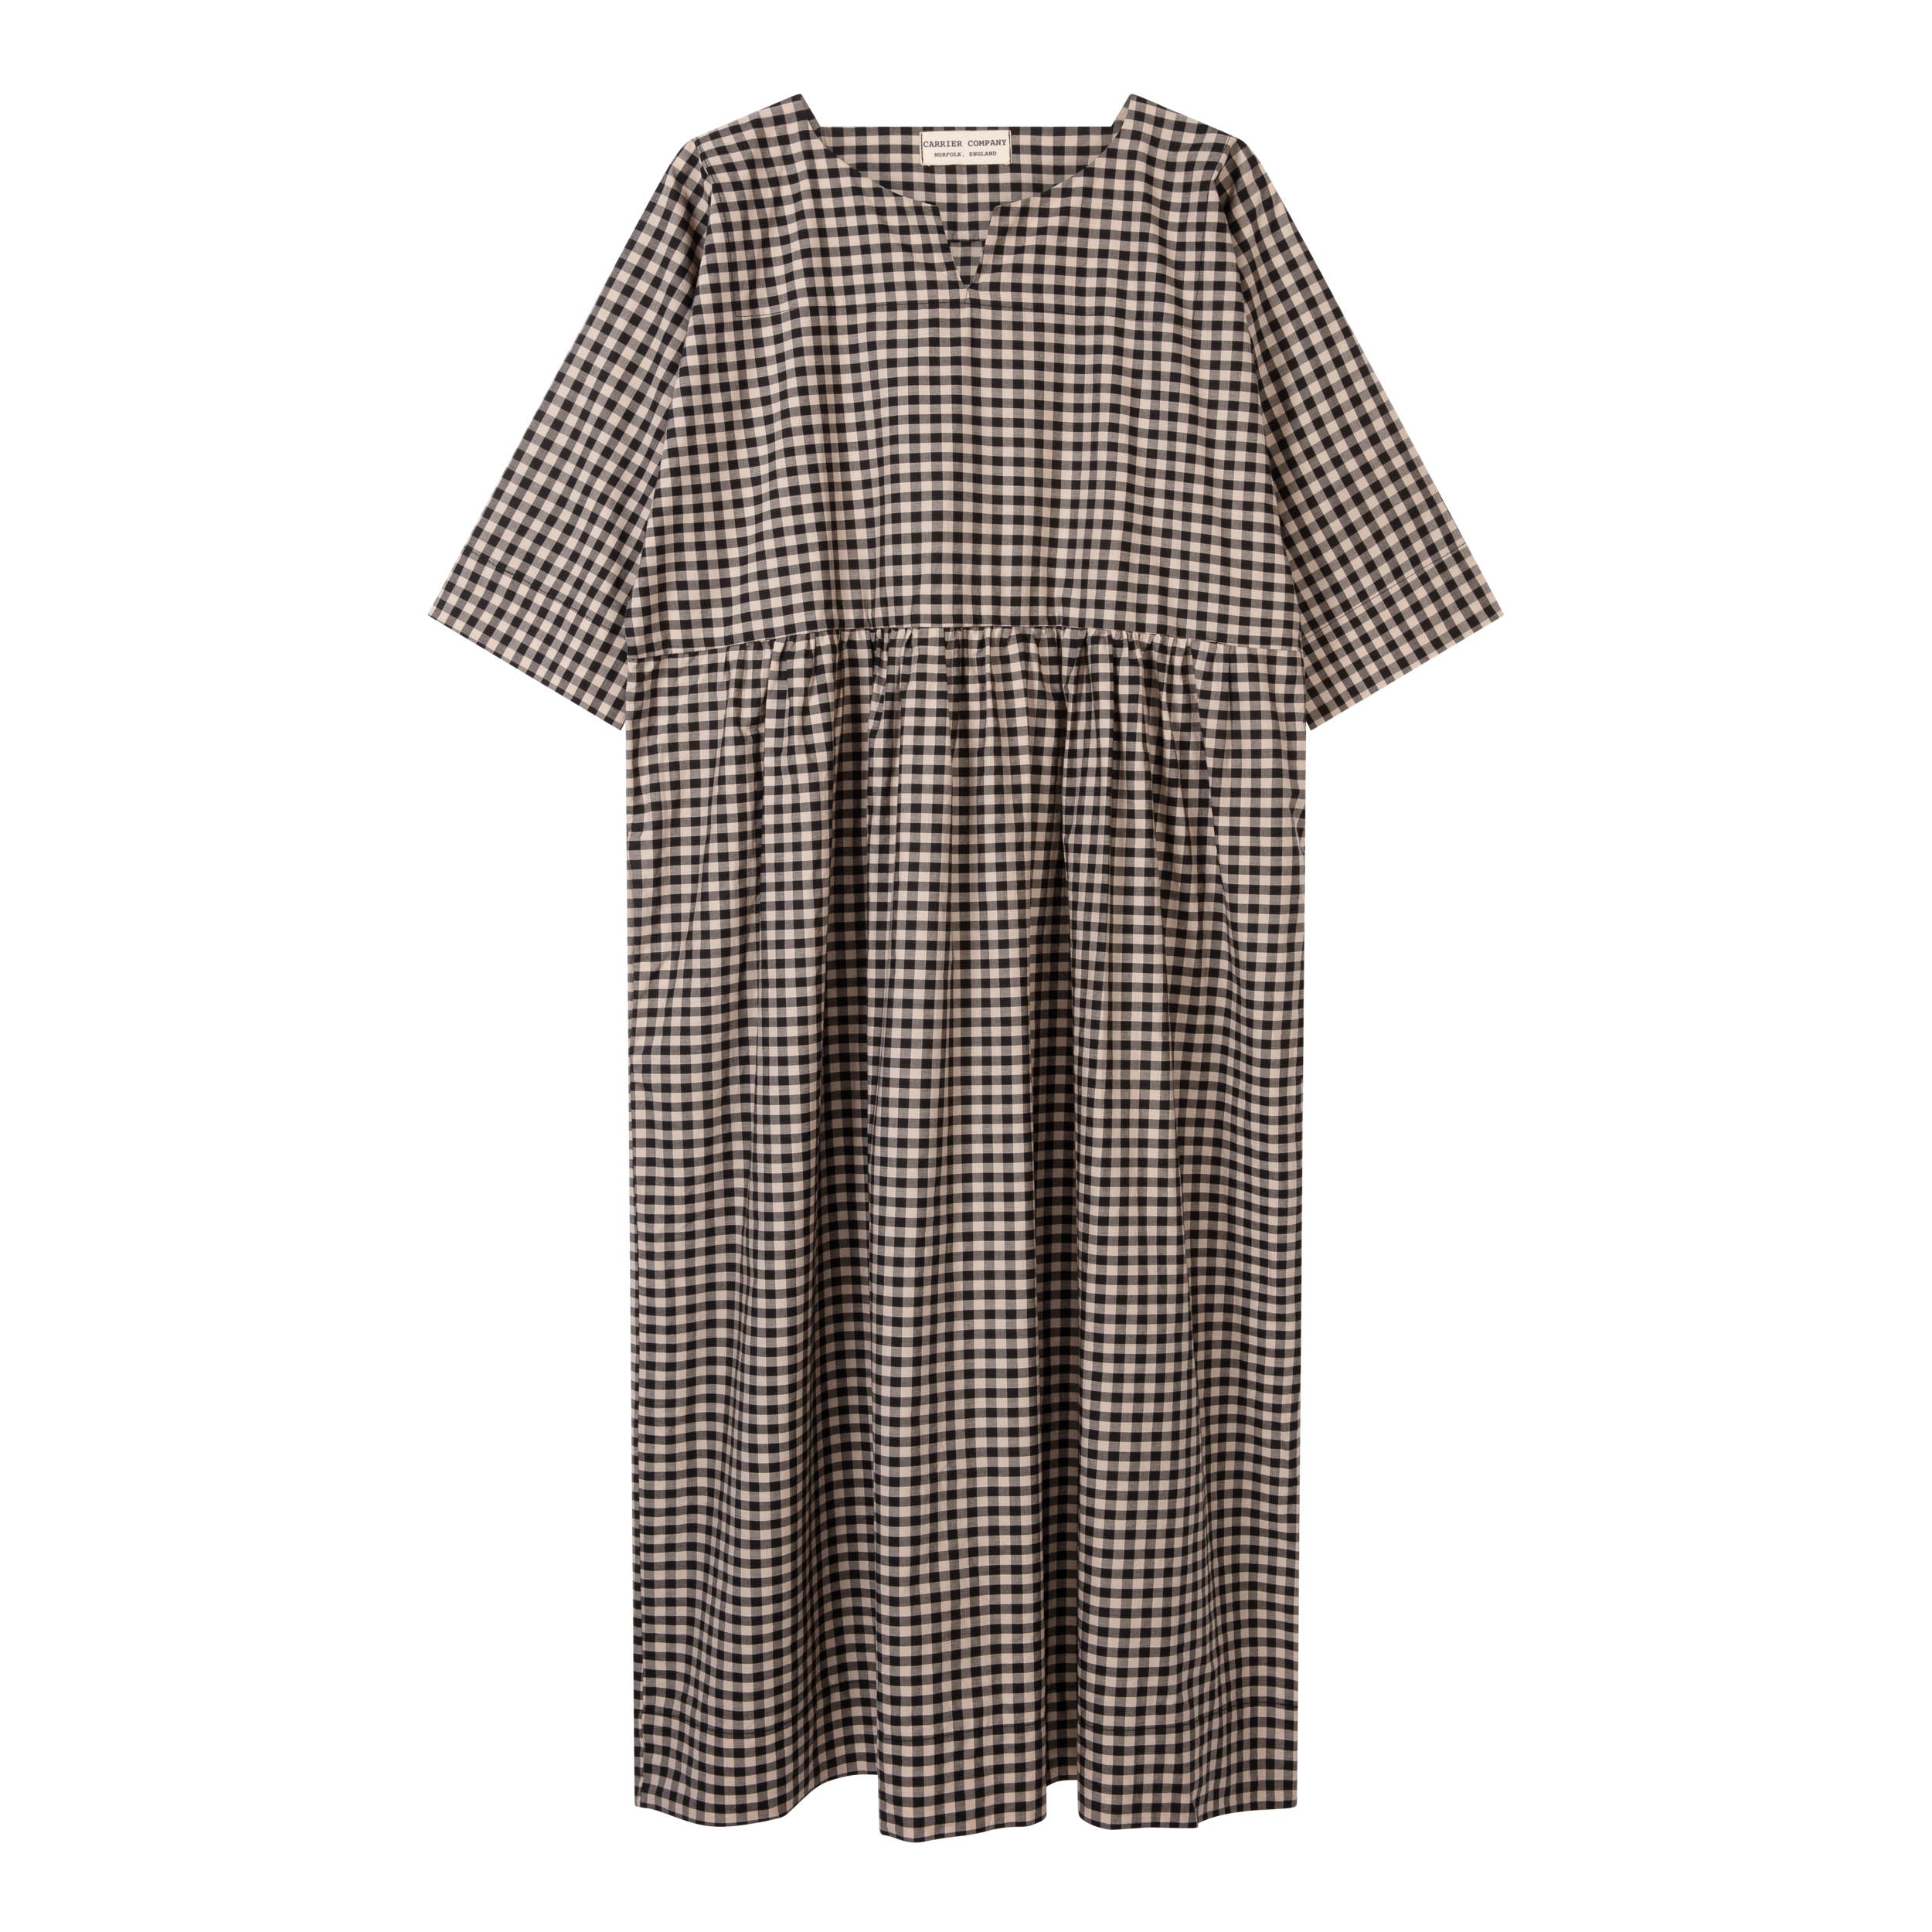 Carrier Company Chelsea Tee Shirt Dress in Black and Ivory Gingham Check